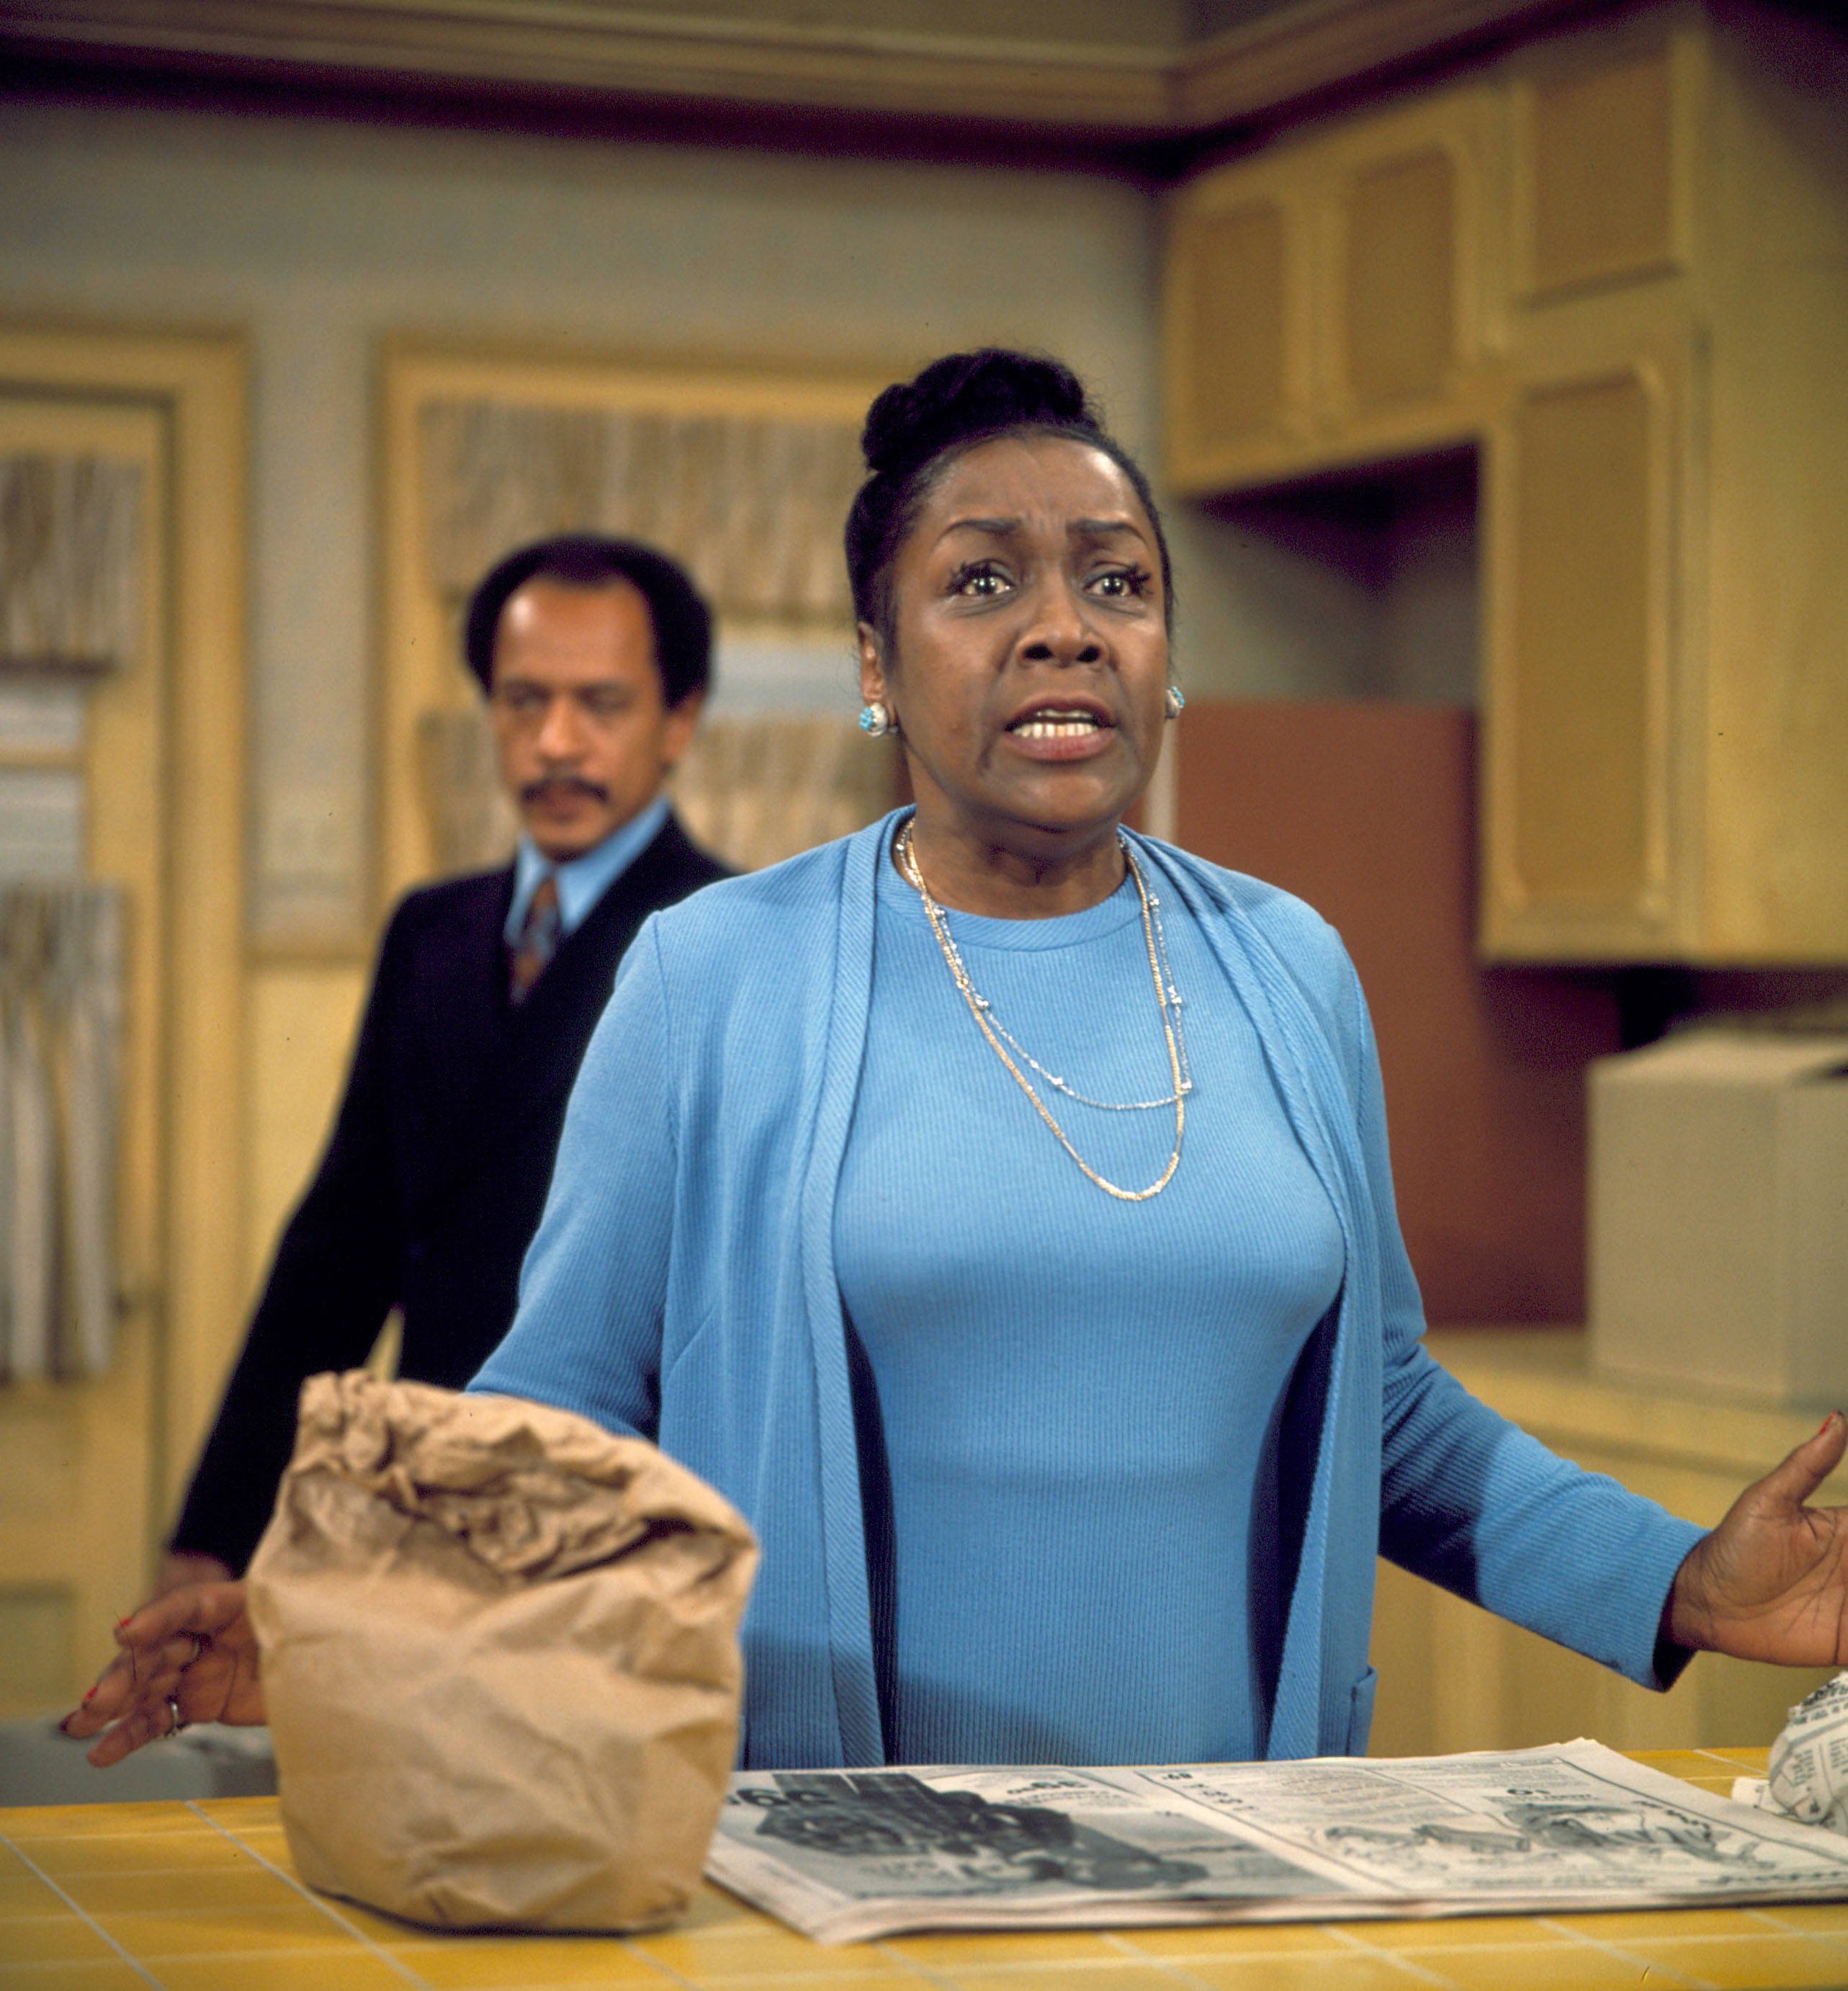 Sherman Hemsley (as George Jefferson) and Isabel Sanford (as Louise Jefferson) in a scene from "The Jeffersons" circa 1974 | Source: Getty Images